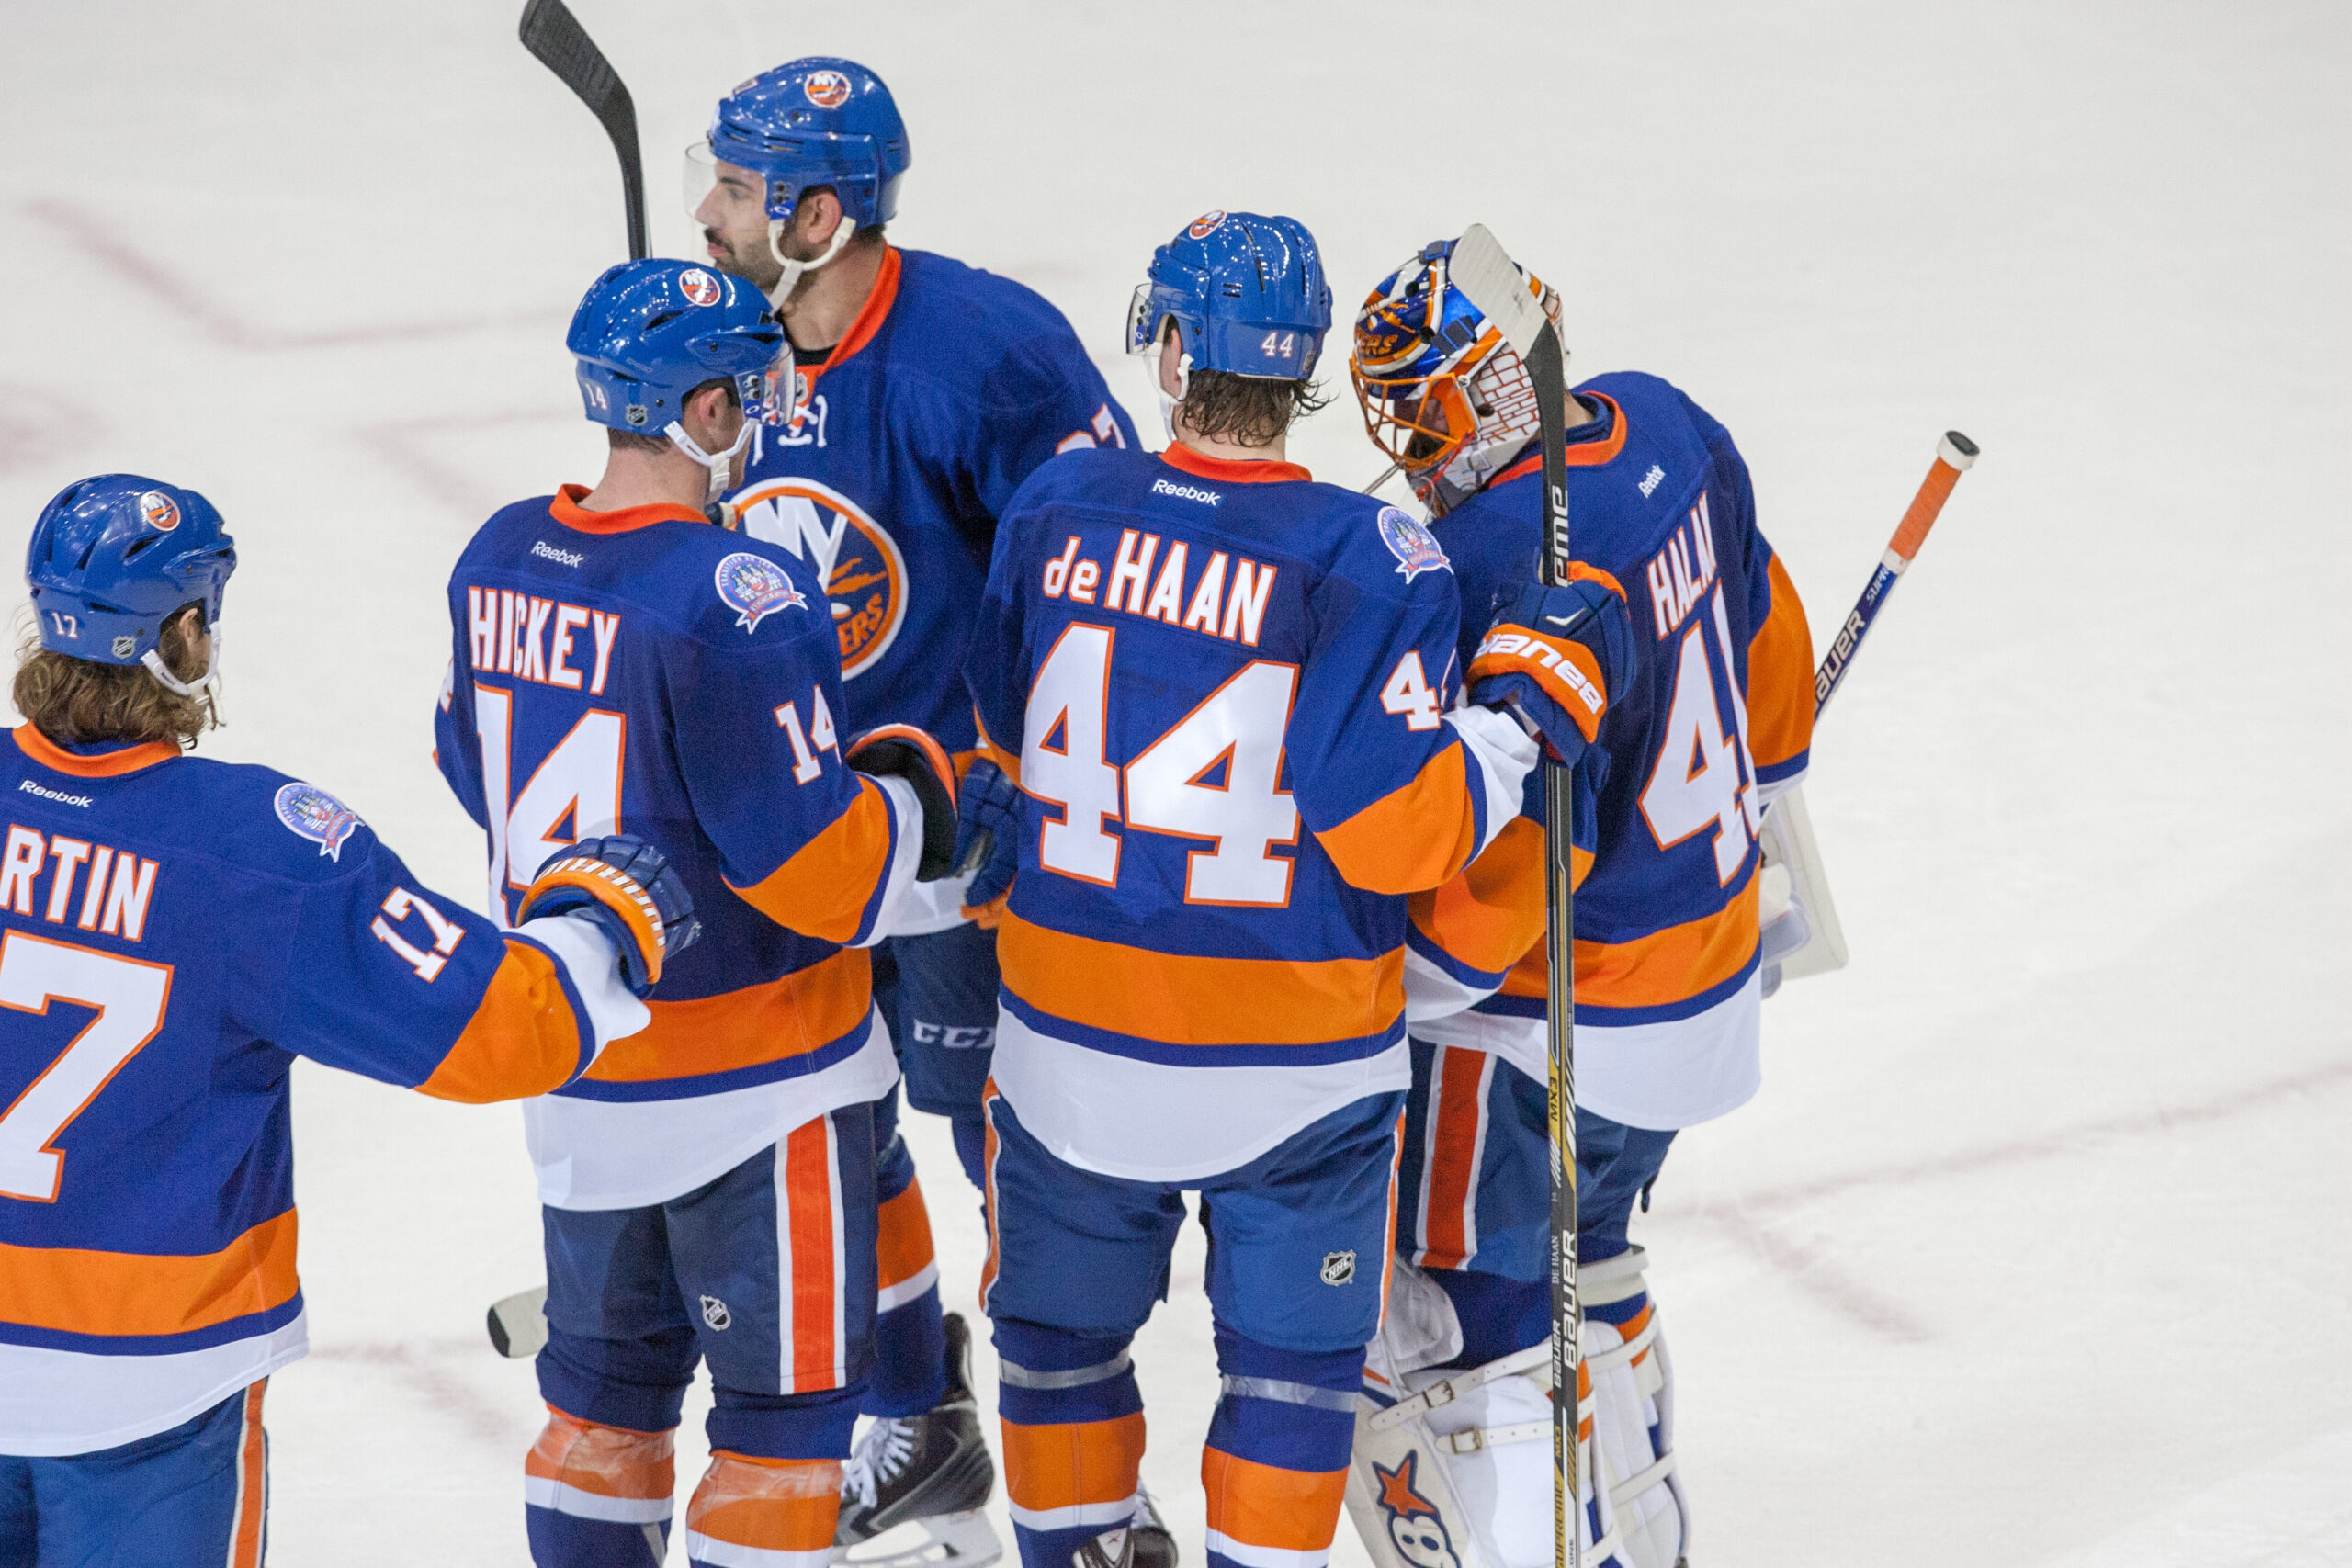 Forty Years in Making, Isles Blank Rangers